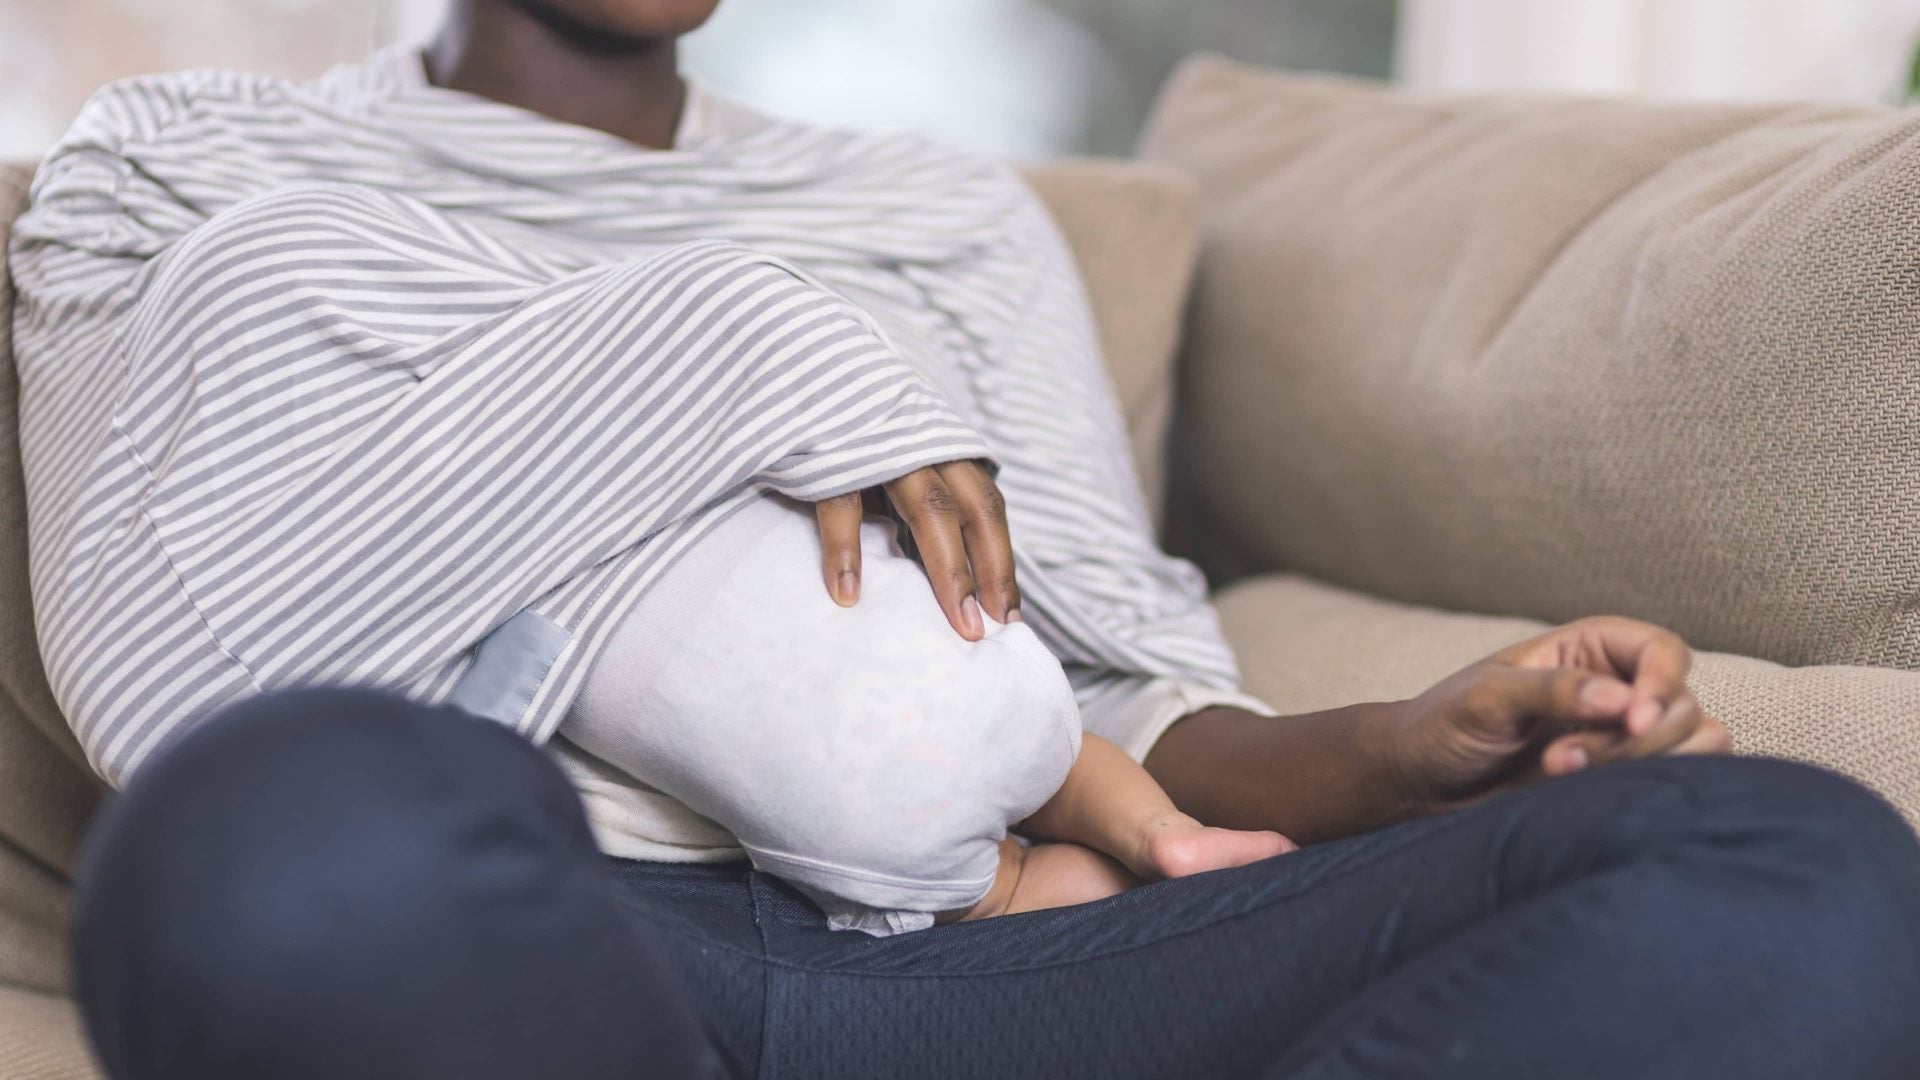 Black Women Are Breastfeeding Less Than Any Other Group, But Why? A Pediatrician Weighs In